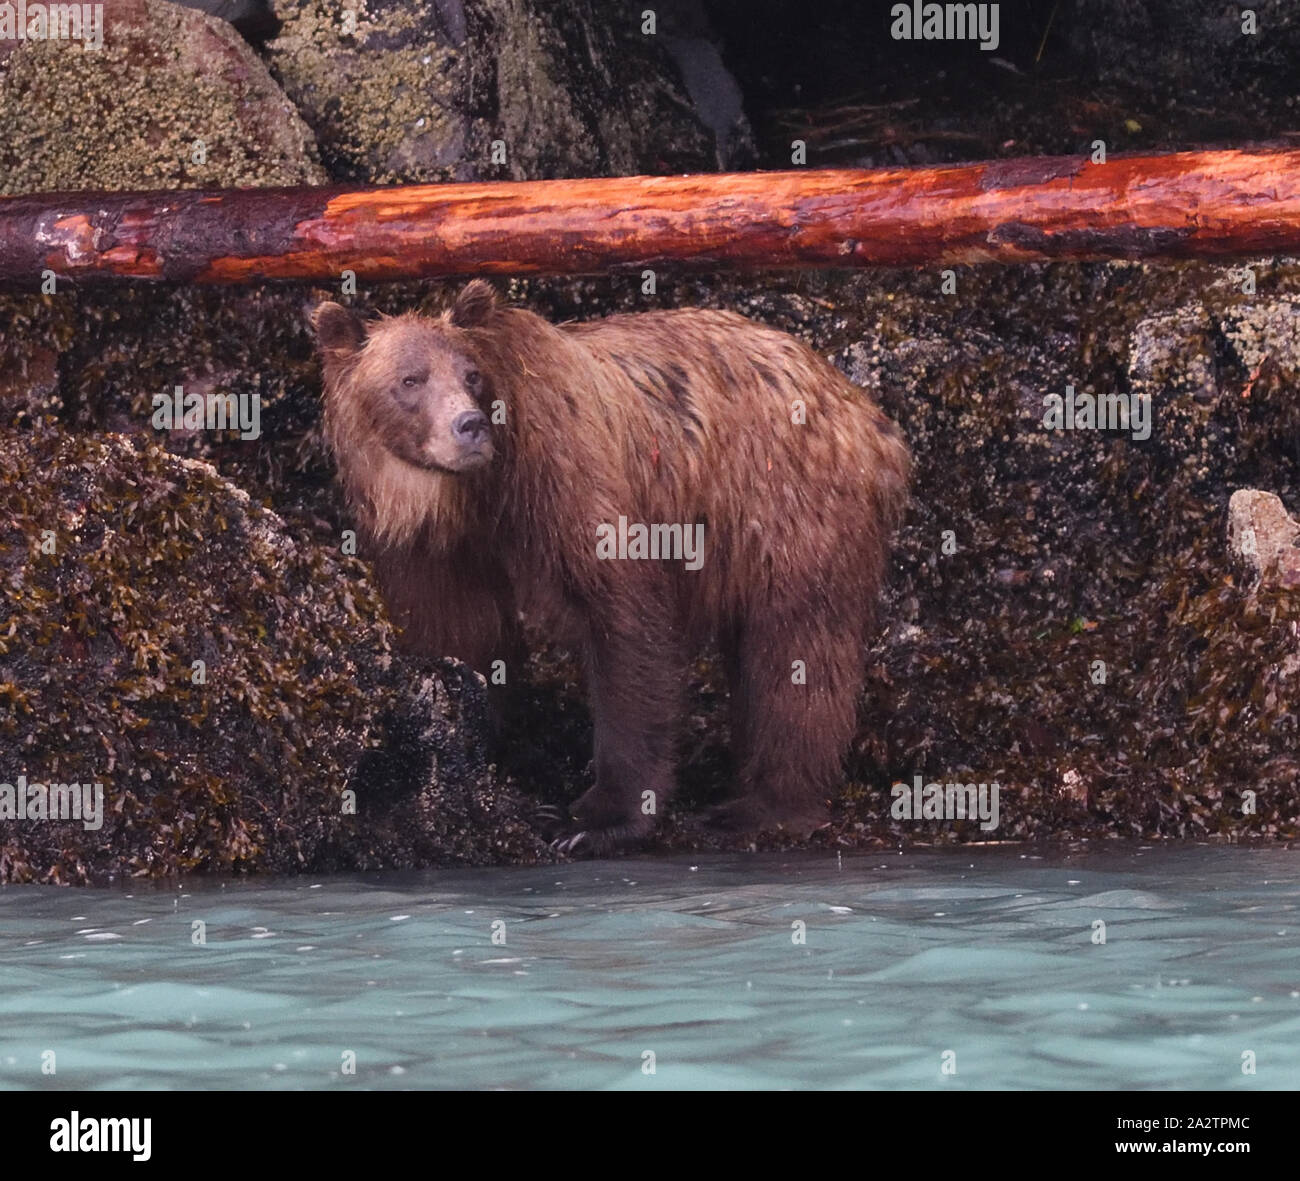 A grizzly bear (Ursus arctos) hunts for food on a rocky shore at low tide. It uses its long claws to dig and turn over rocks and its teeth to scrape s Stock Photo